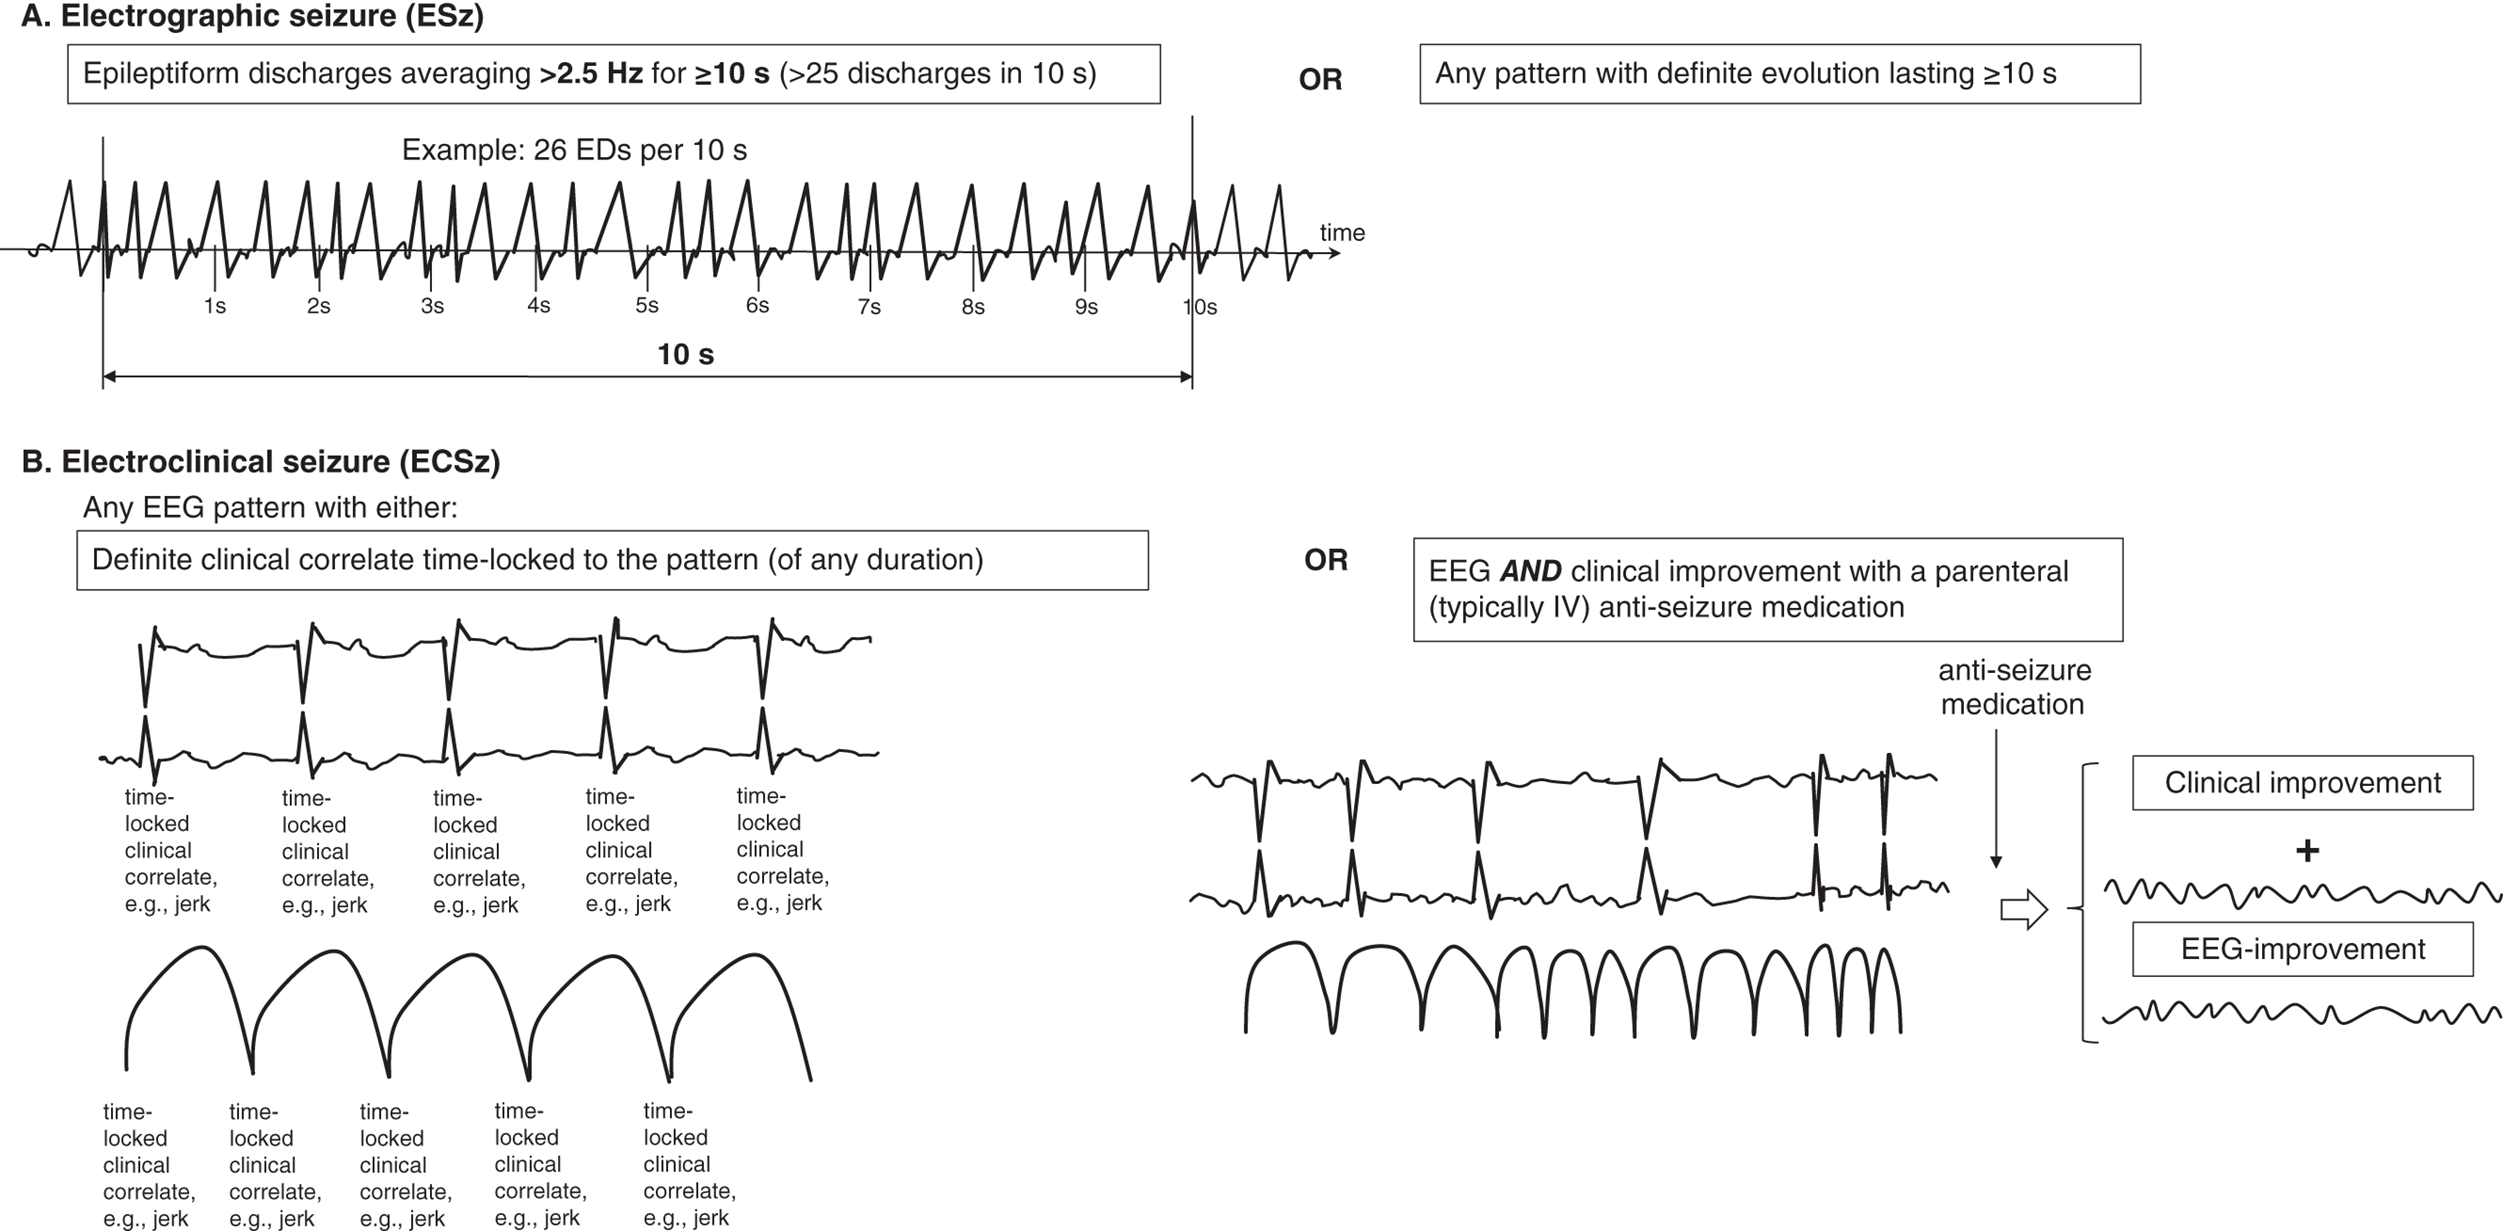 Schematic illustration of electrographic and electroclinical seizures.